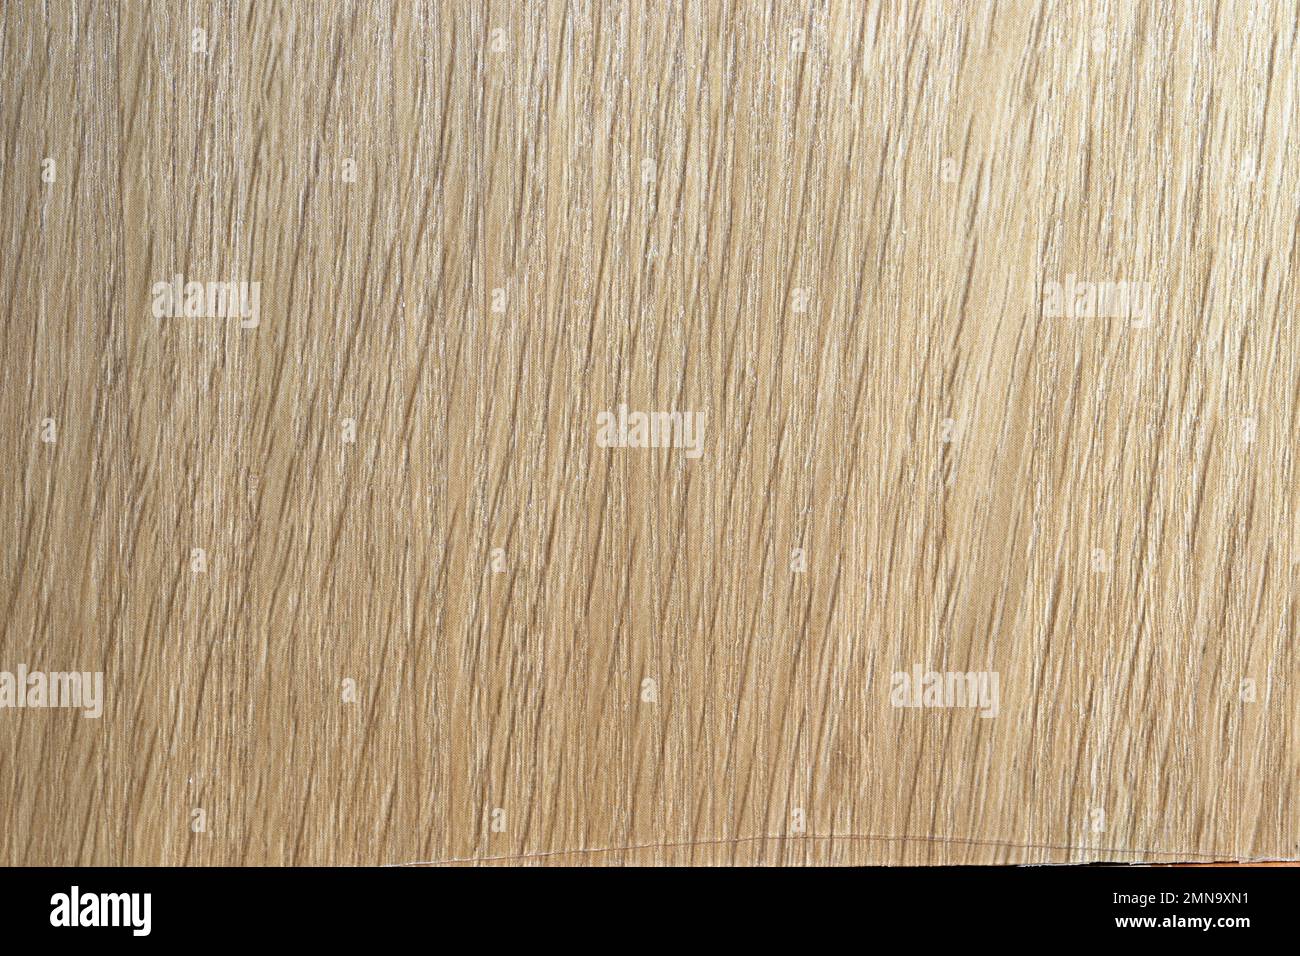 close up of vinyl spc (stone composite) tile texture, use for wooden flooring material. Stock Photo